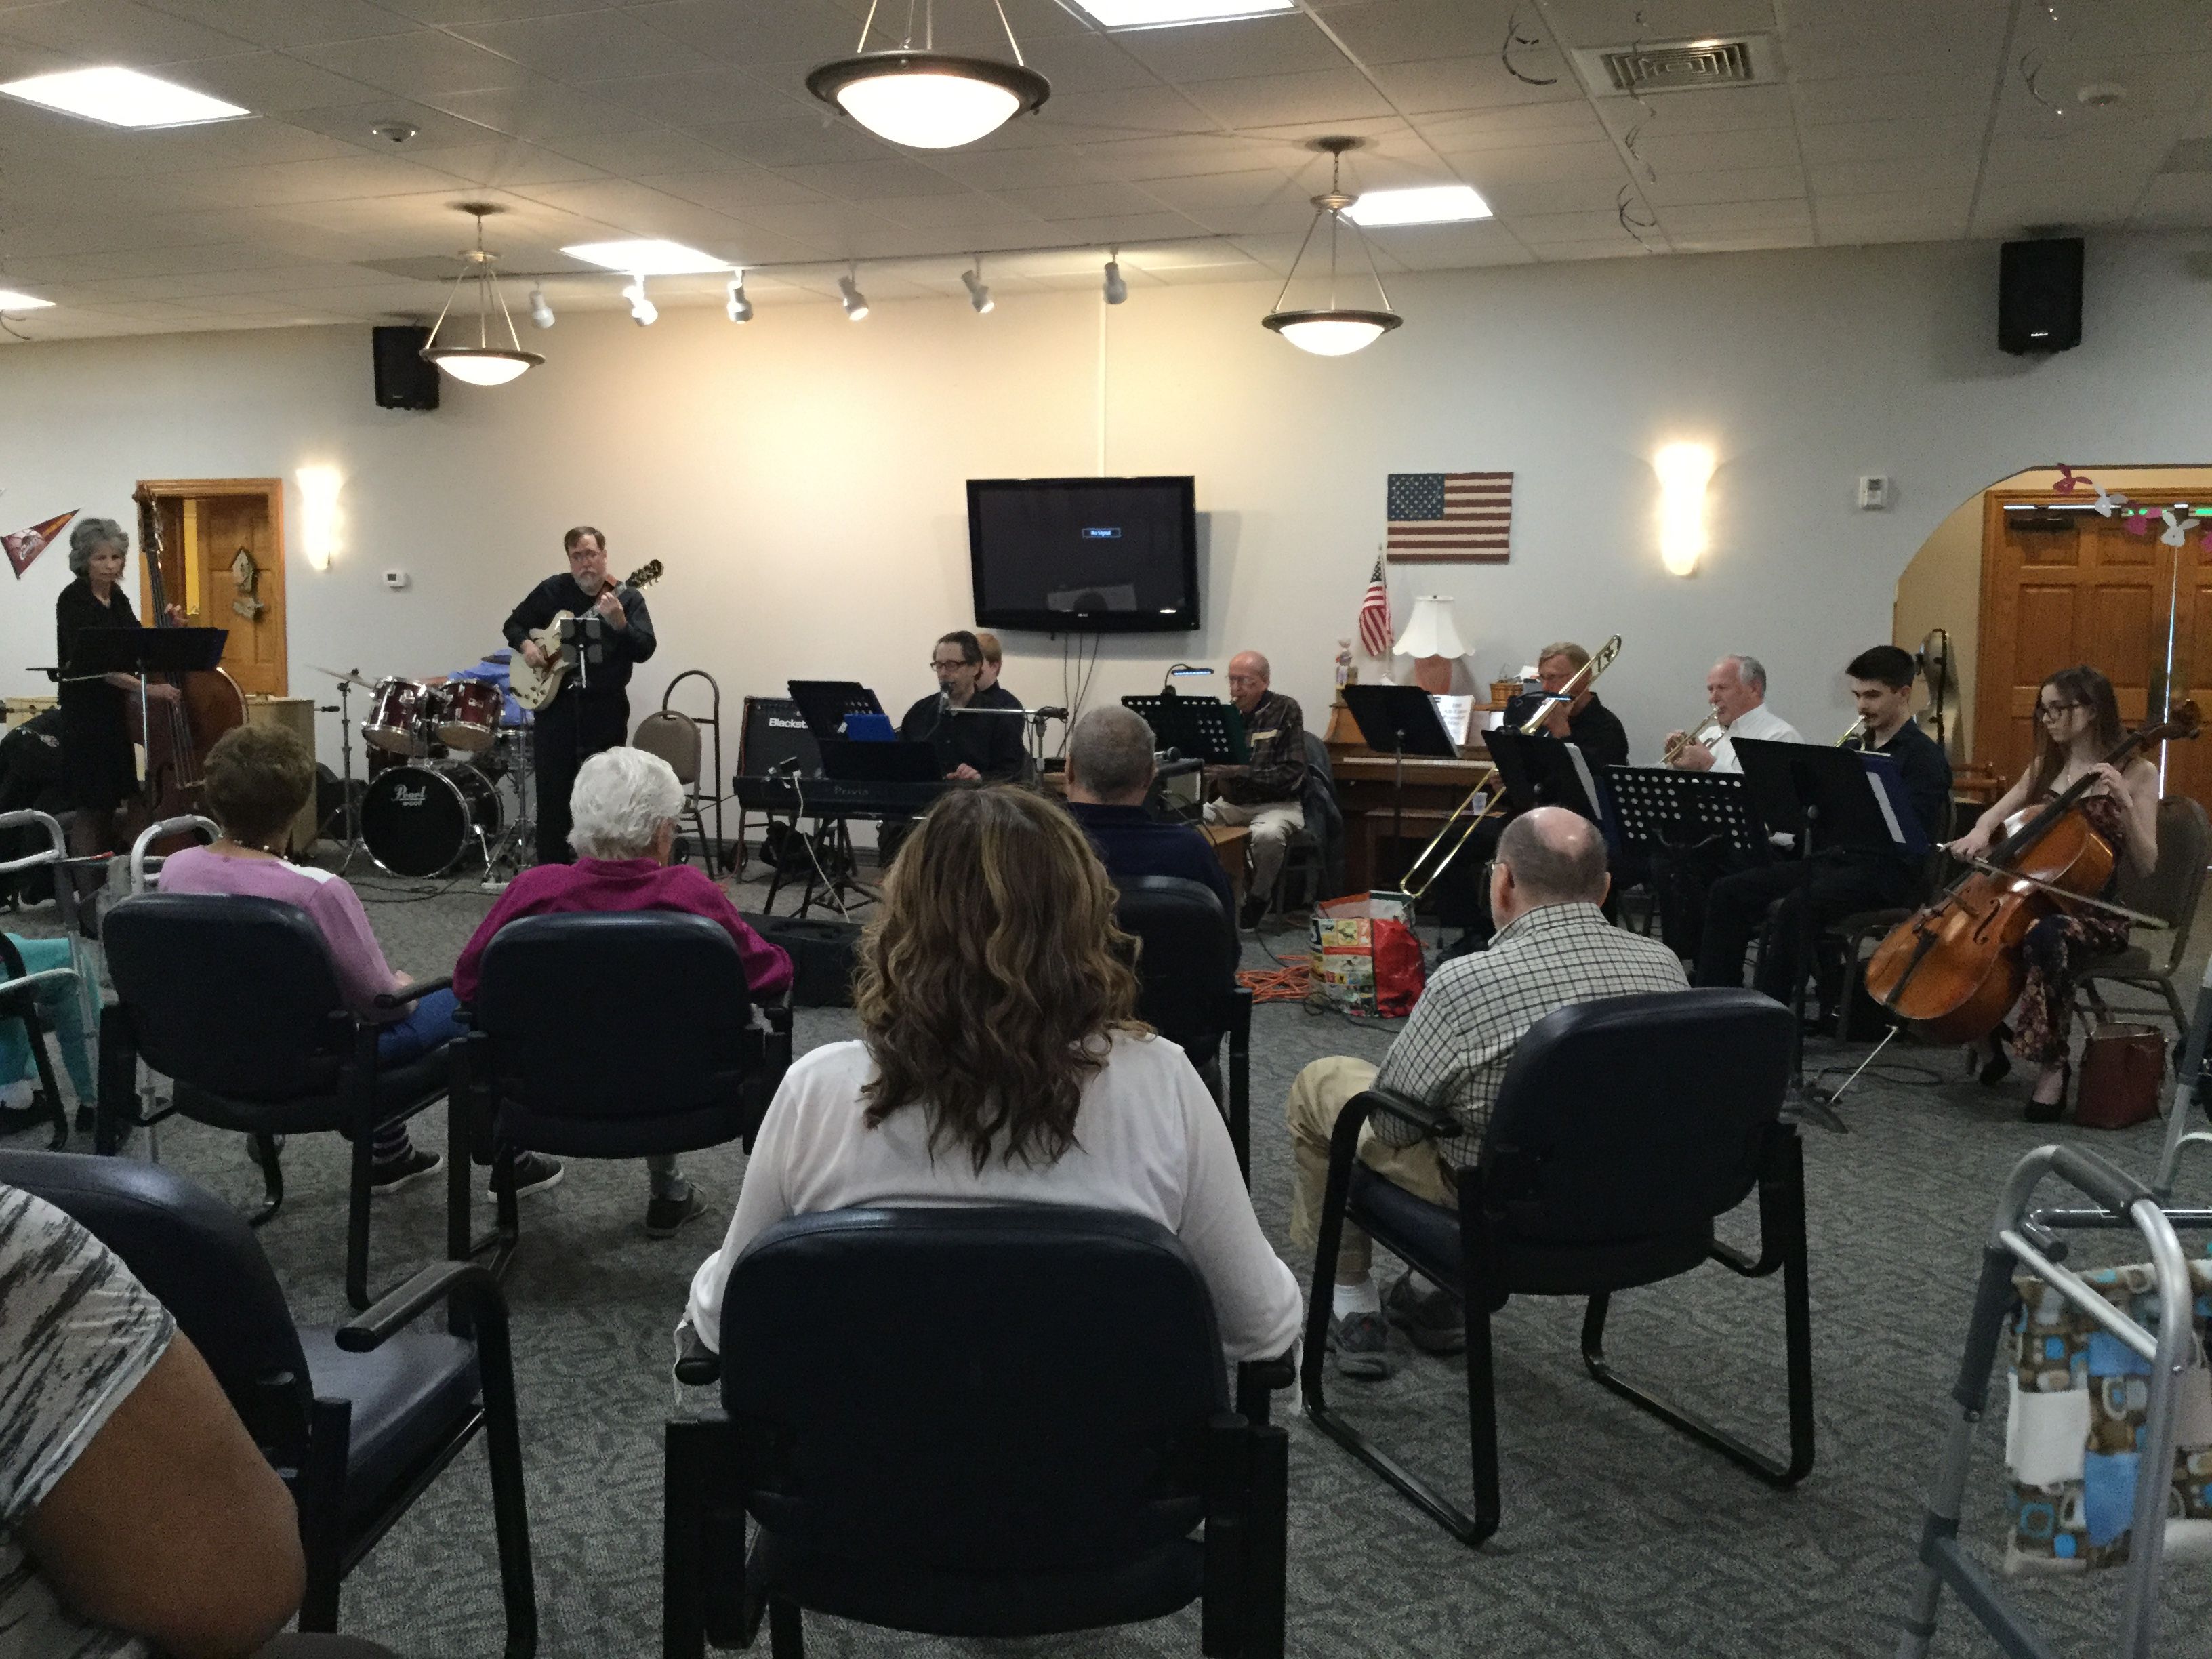 Steve Dallas and his band entertain our members of our Adult Day Center regularly